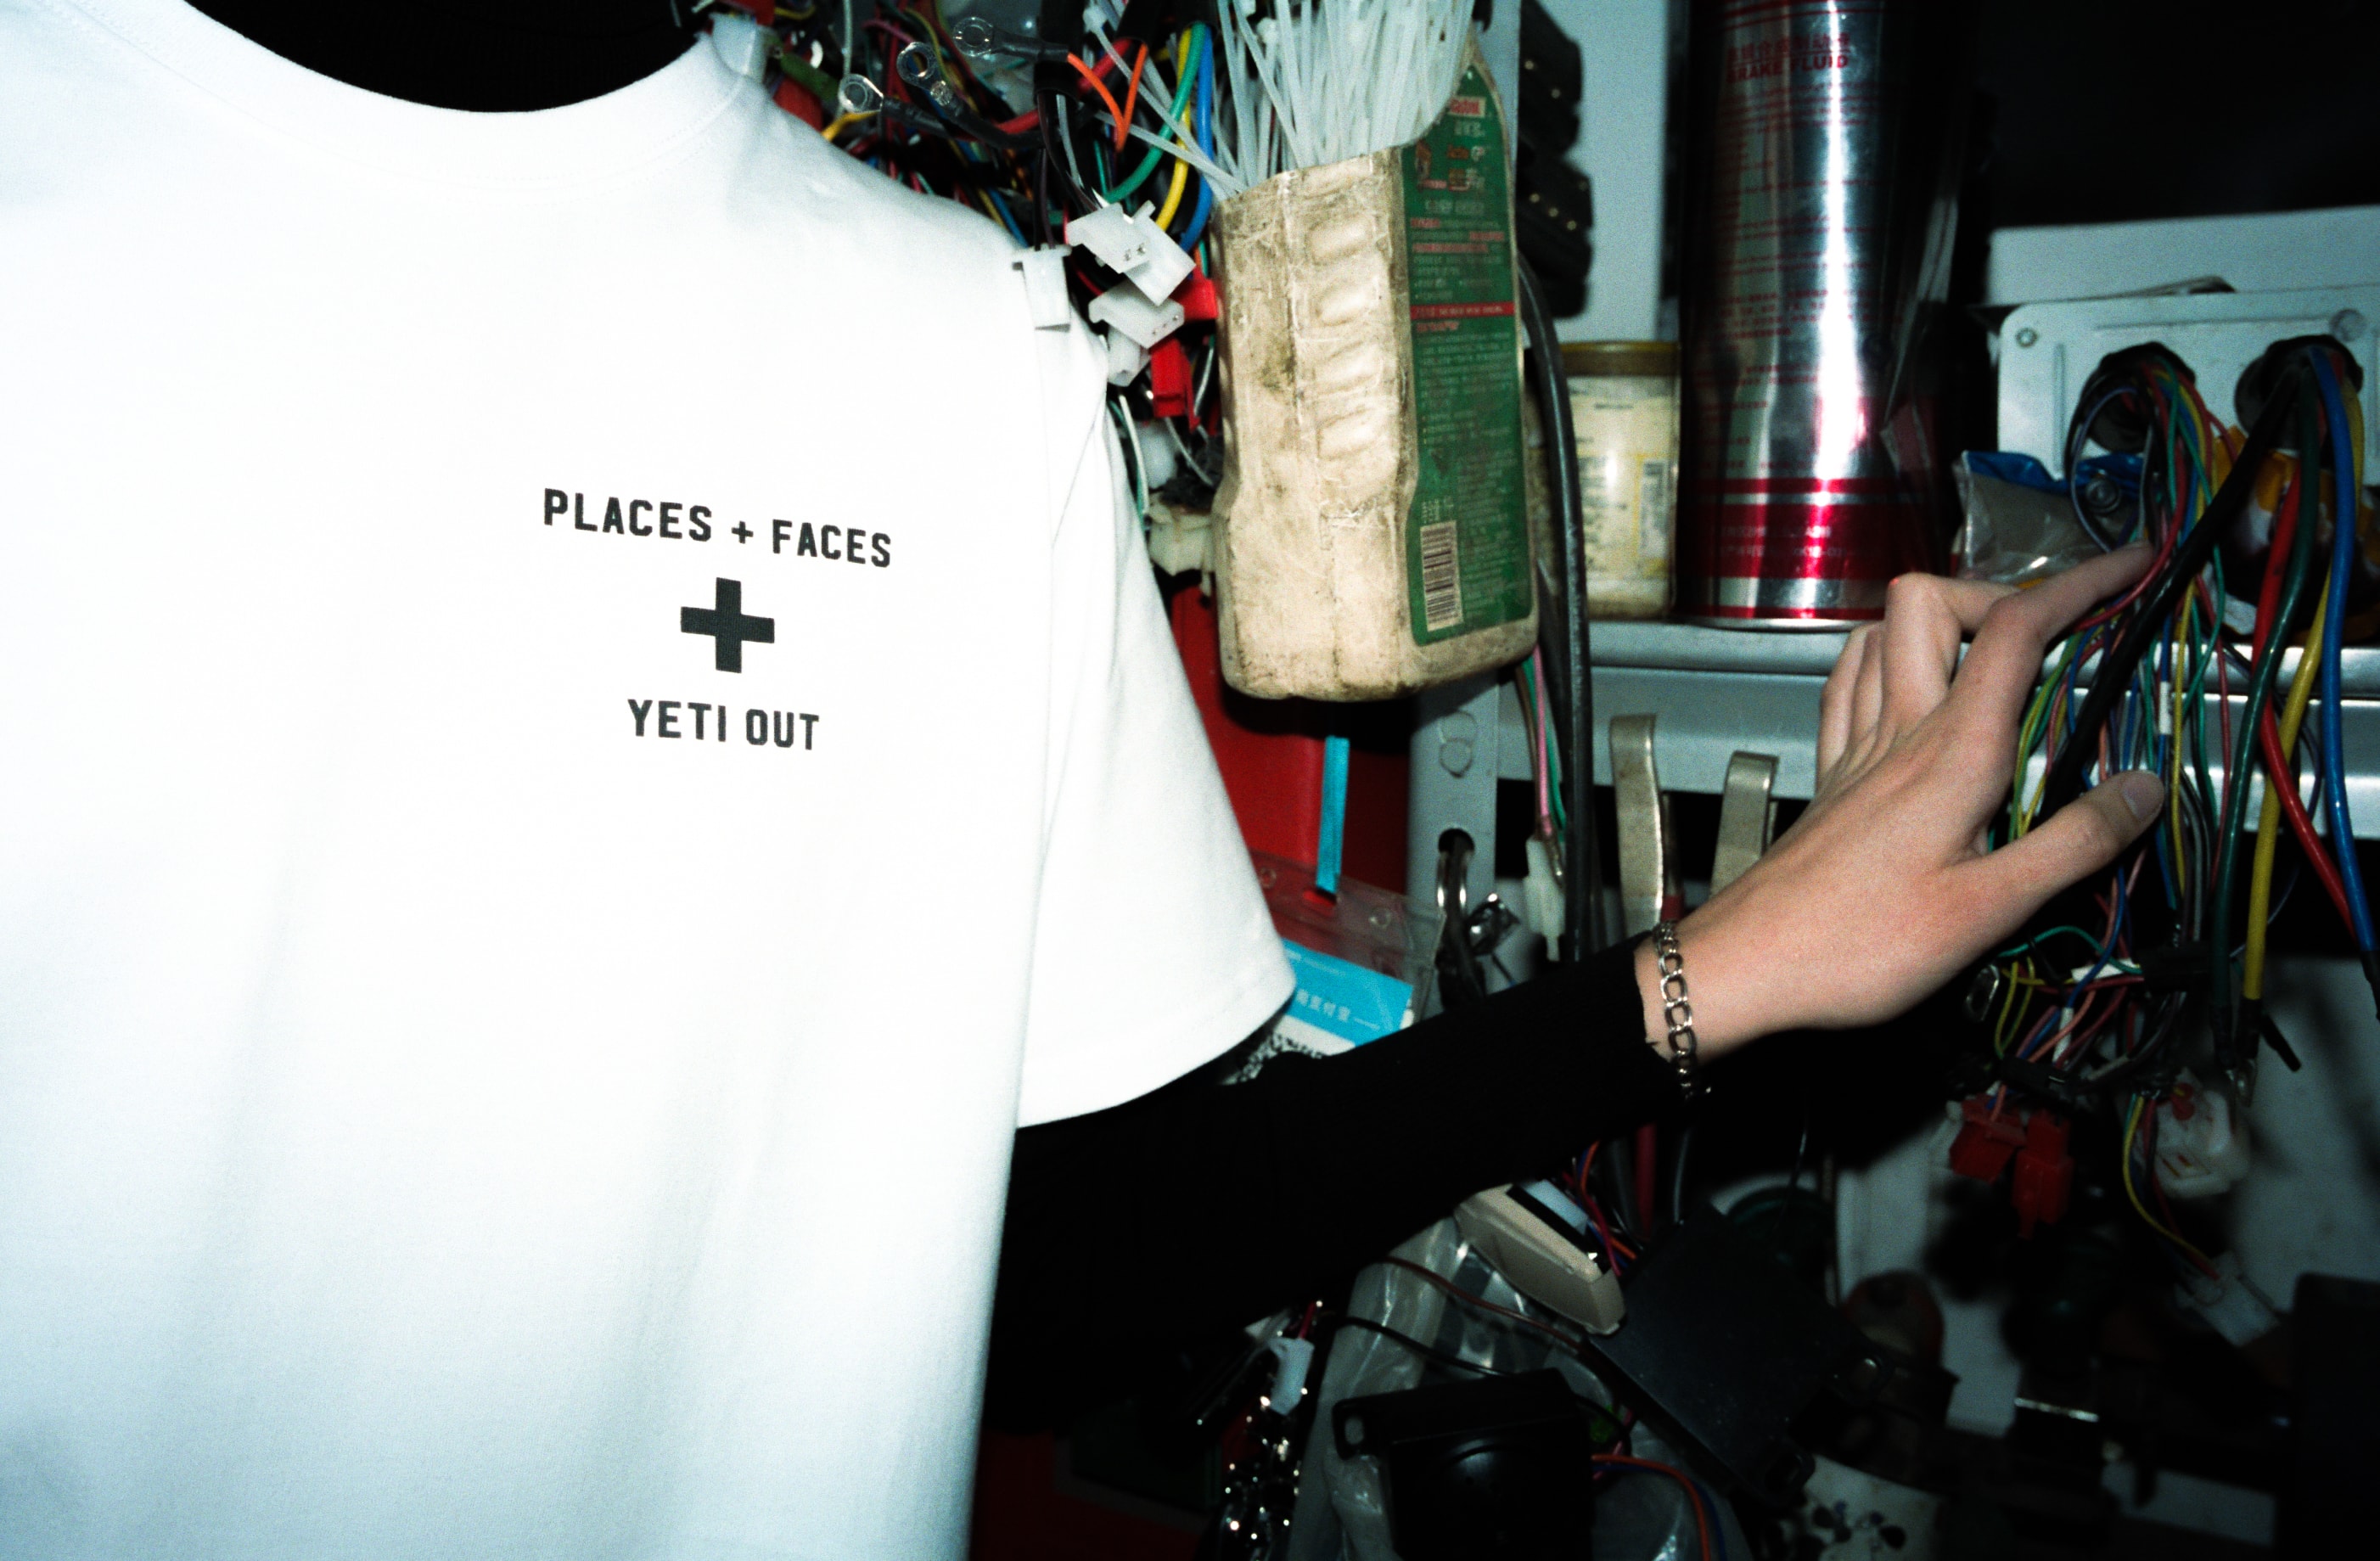 YETI OUT 聯手 Places + Faces 打造「親友限定」合作 Tee